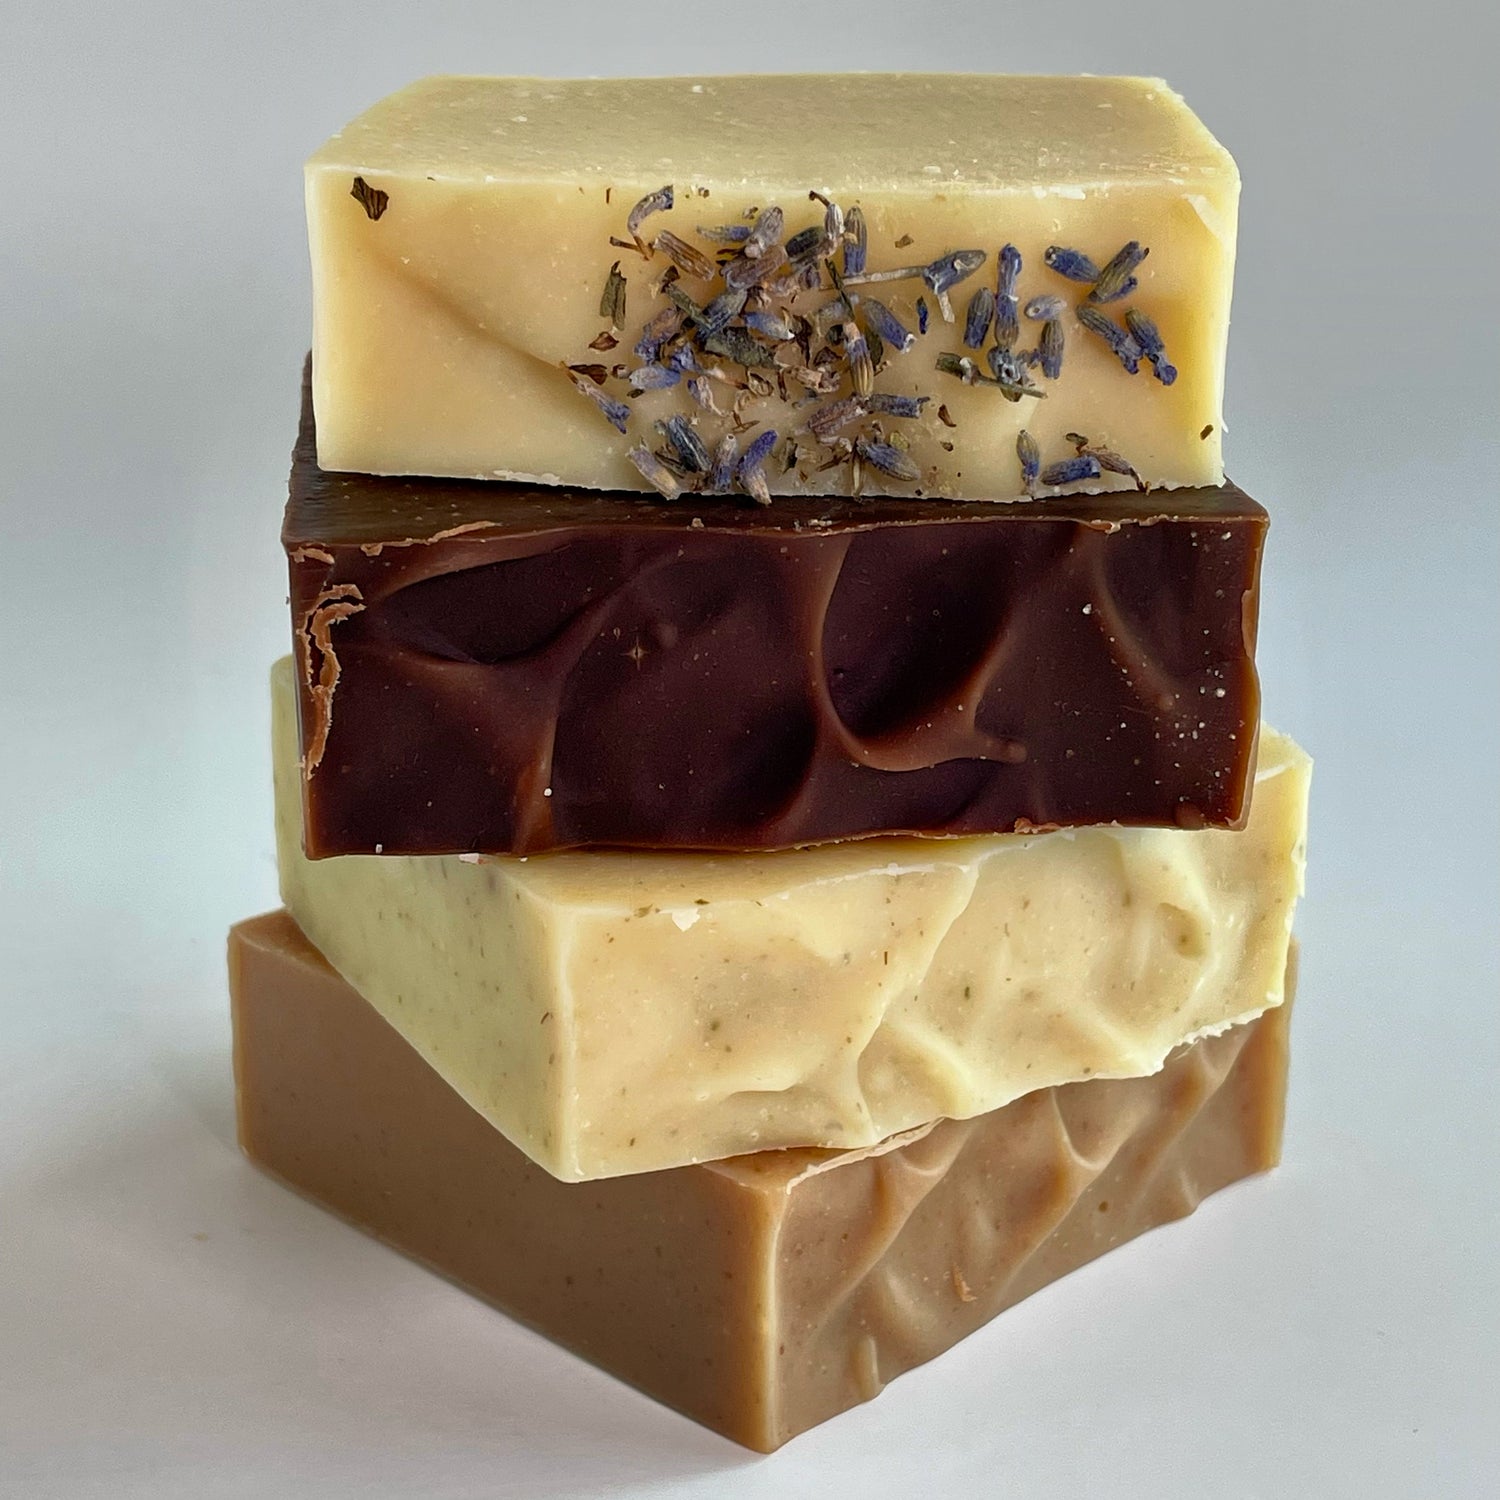 Soap Making with the Best Oils for Bar Soap